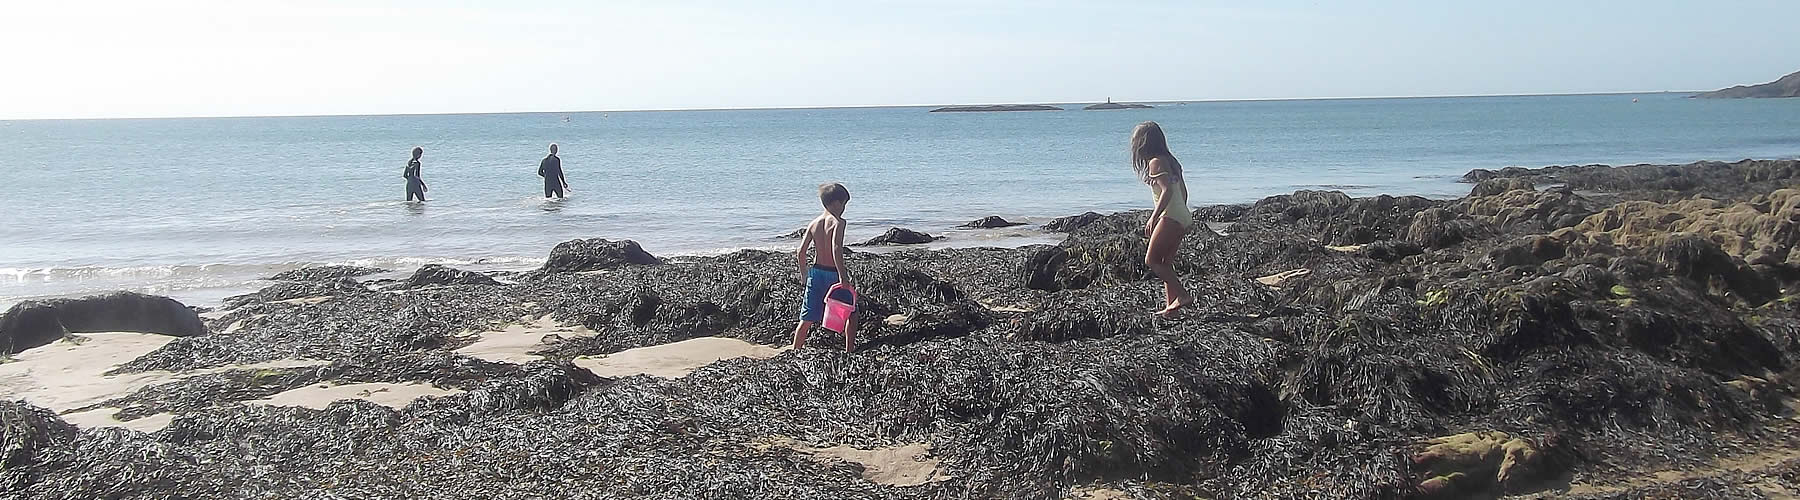 Children Playing in Rock Pools